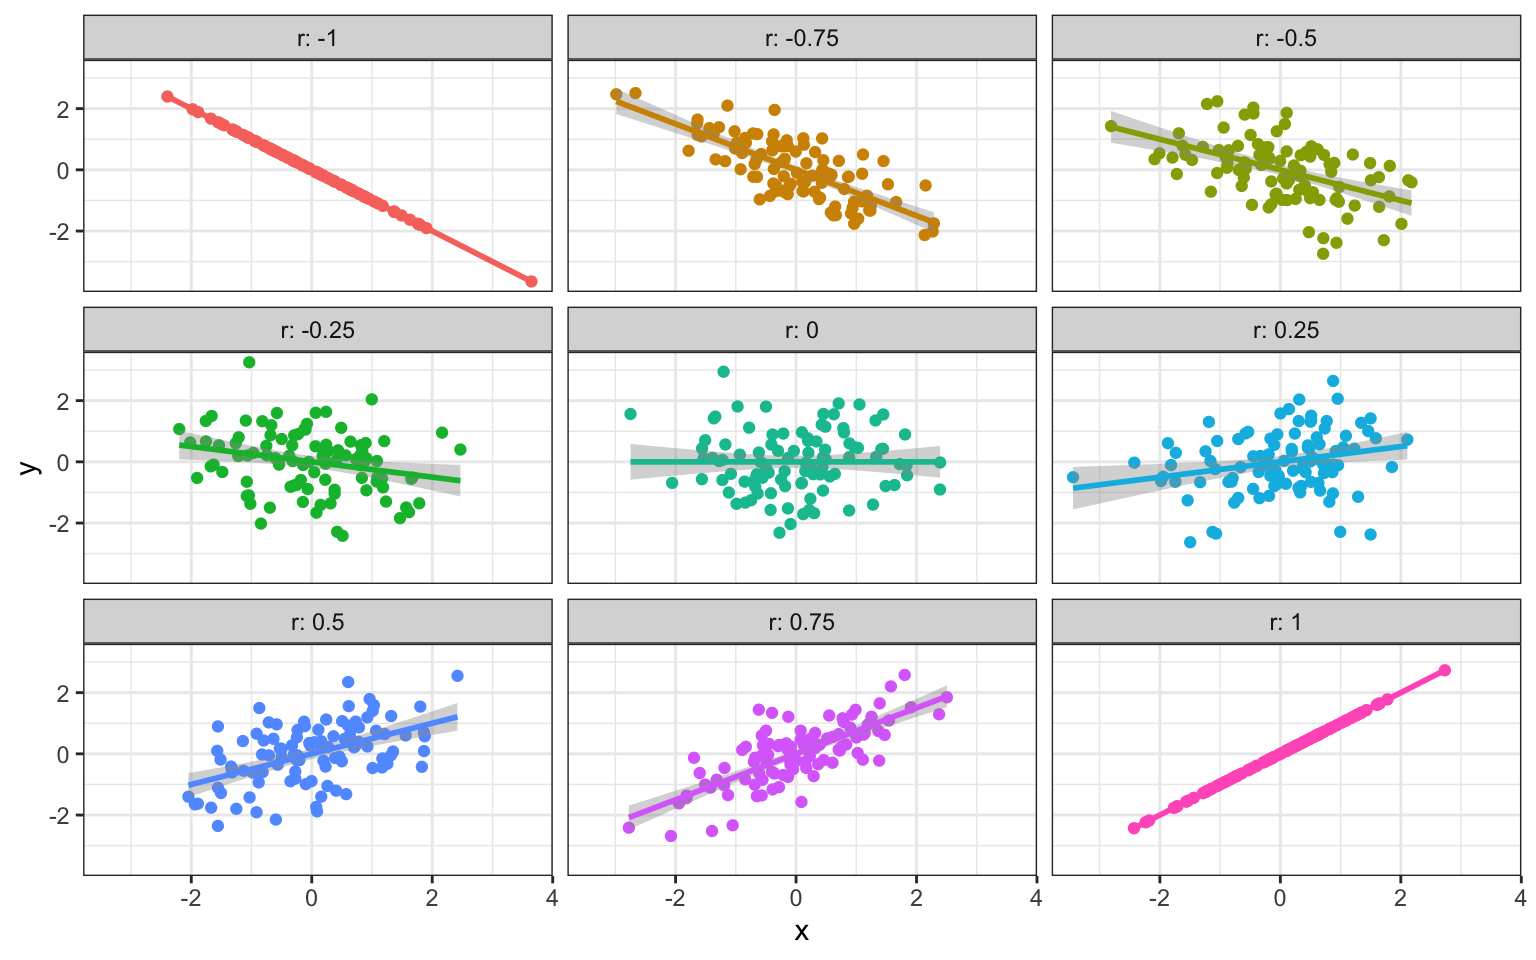 Different Correlations (n = 100)